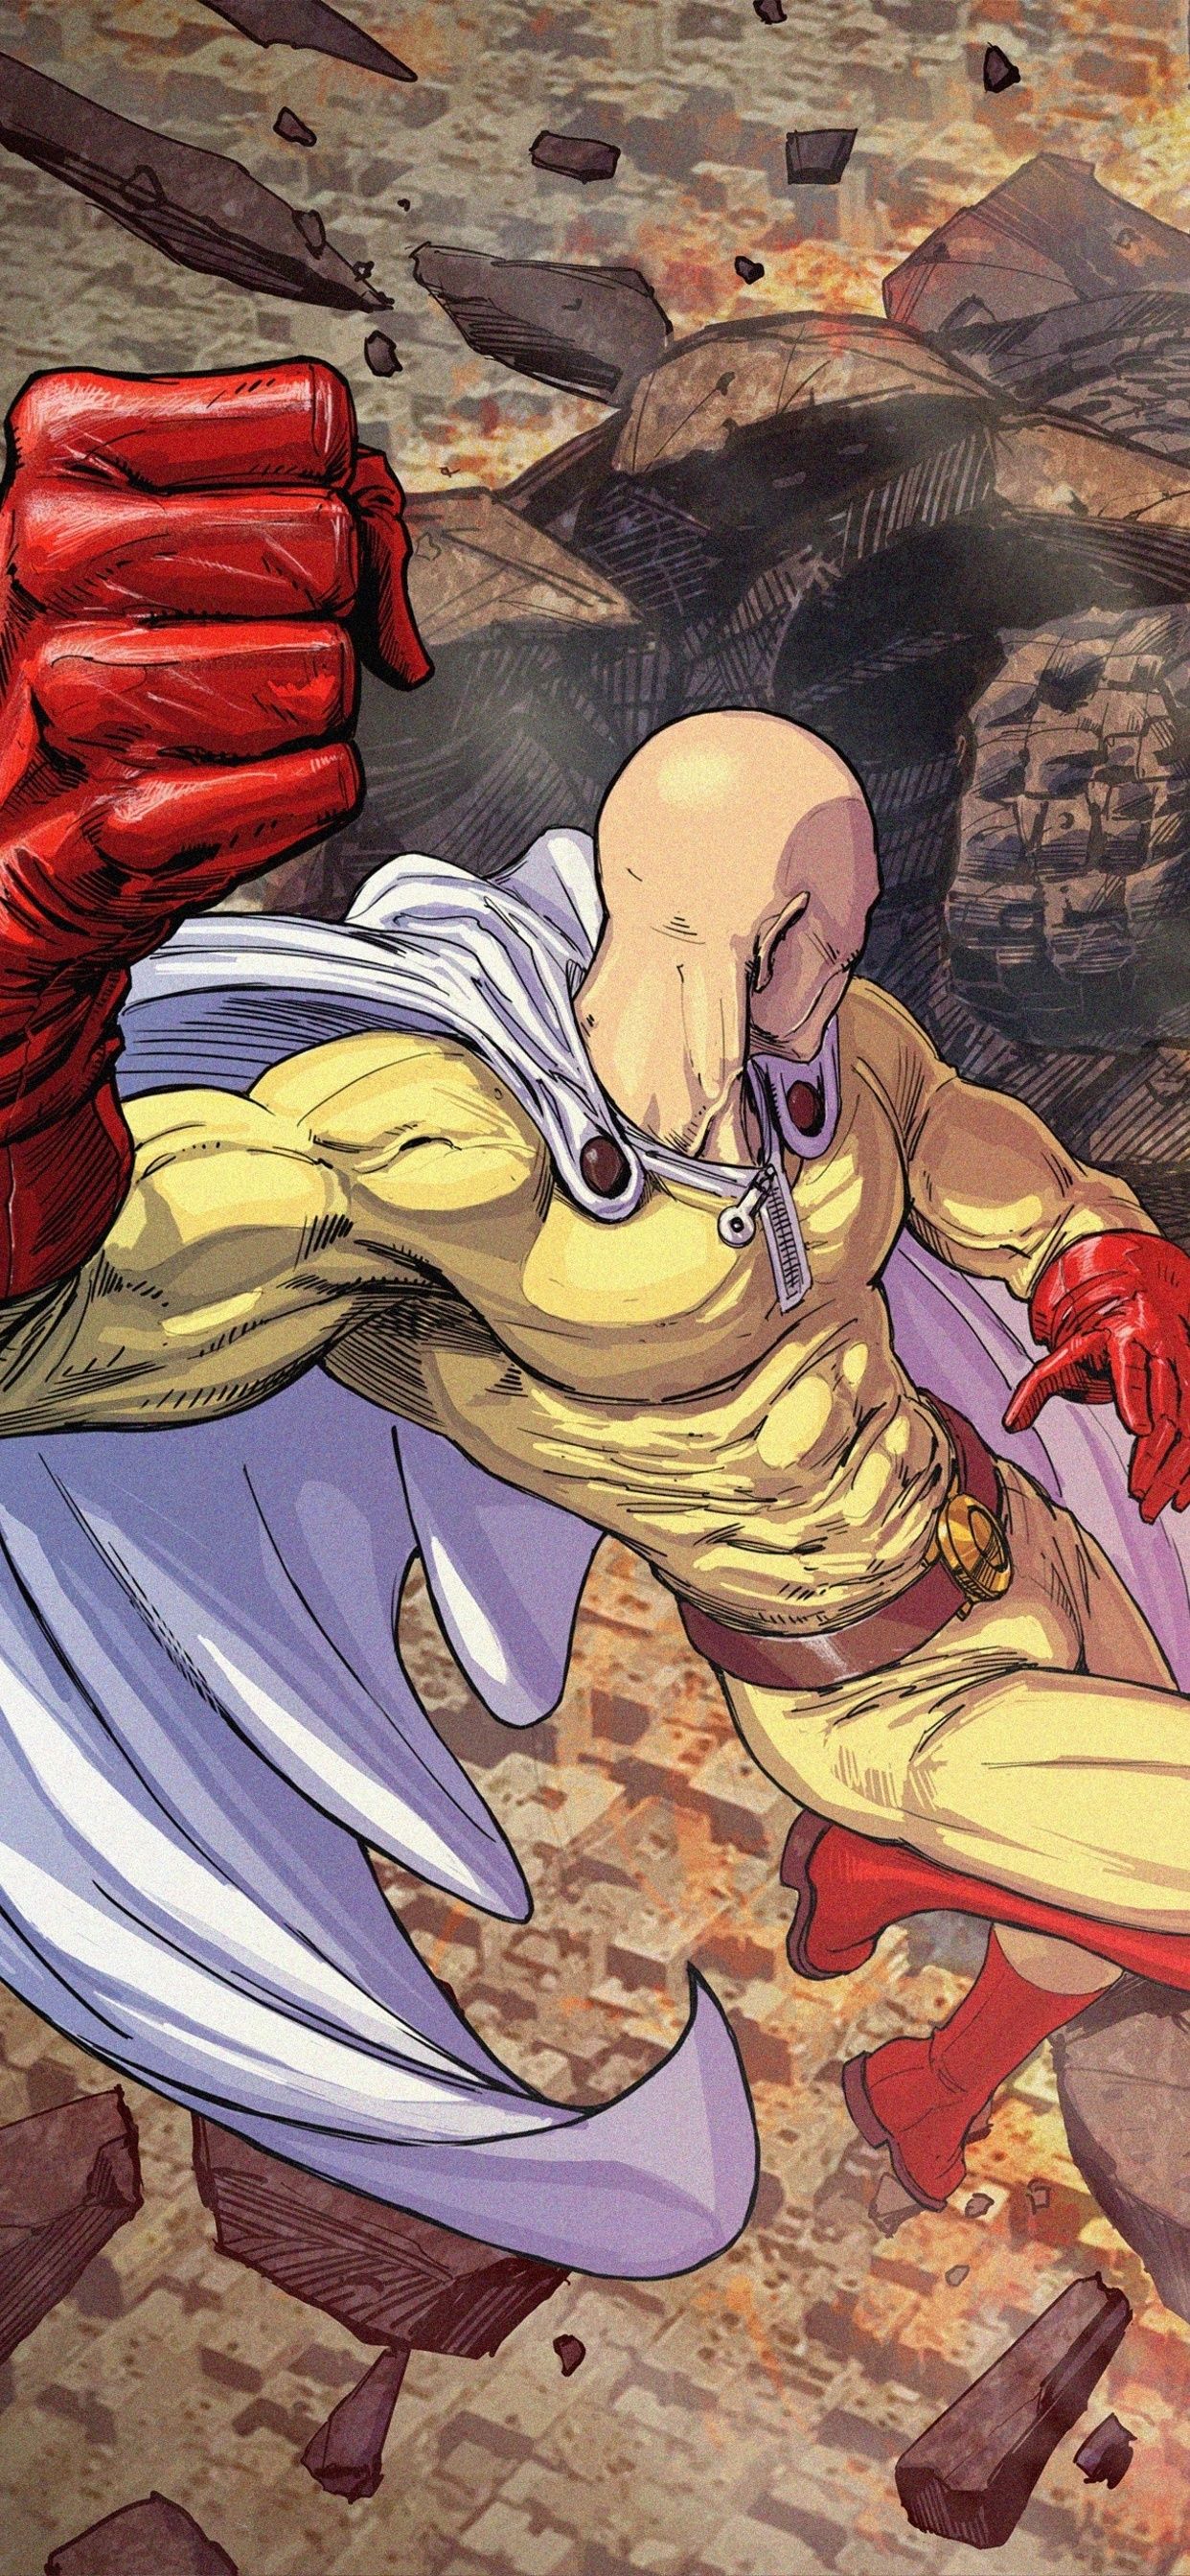 Download wallpaper 840x1160 saitama, one-punch man, anime boy, artwork,  iphone 4, iphone 4s, ipod touch, 840x1160 hd background, 6425